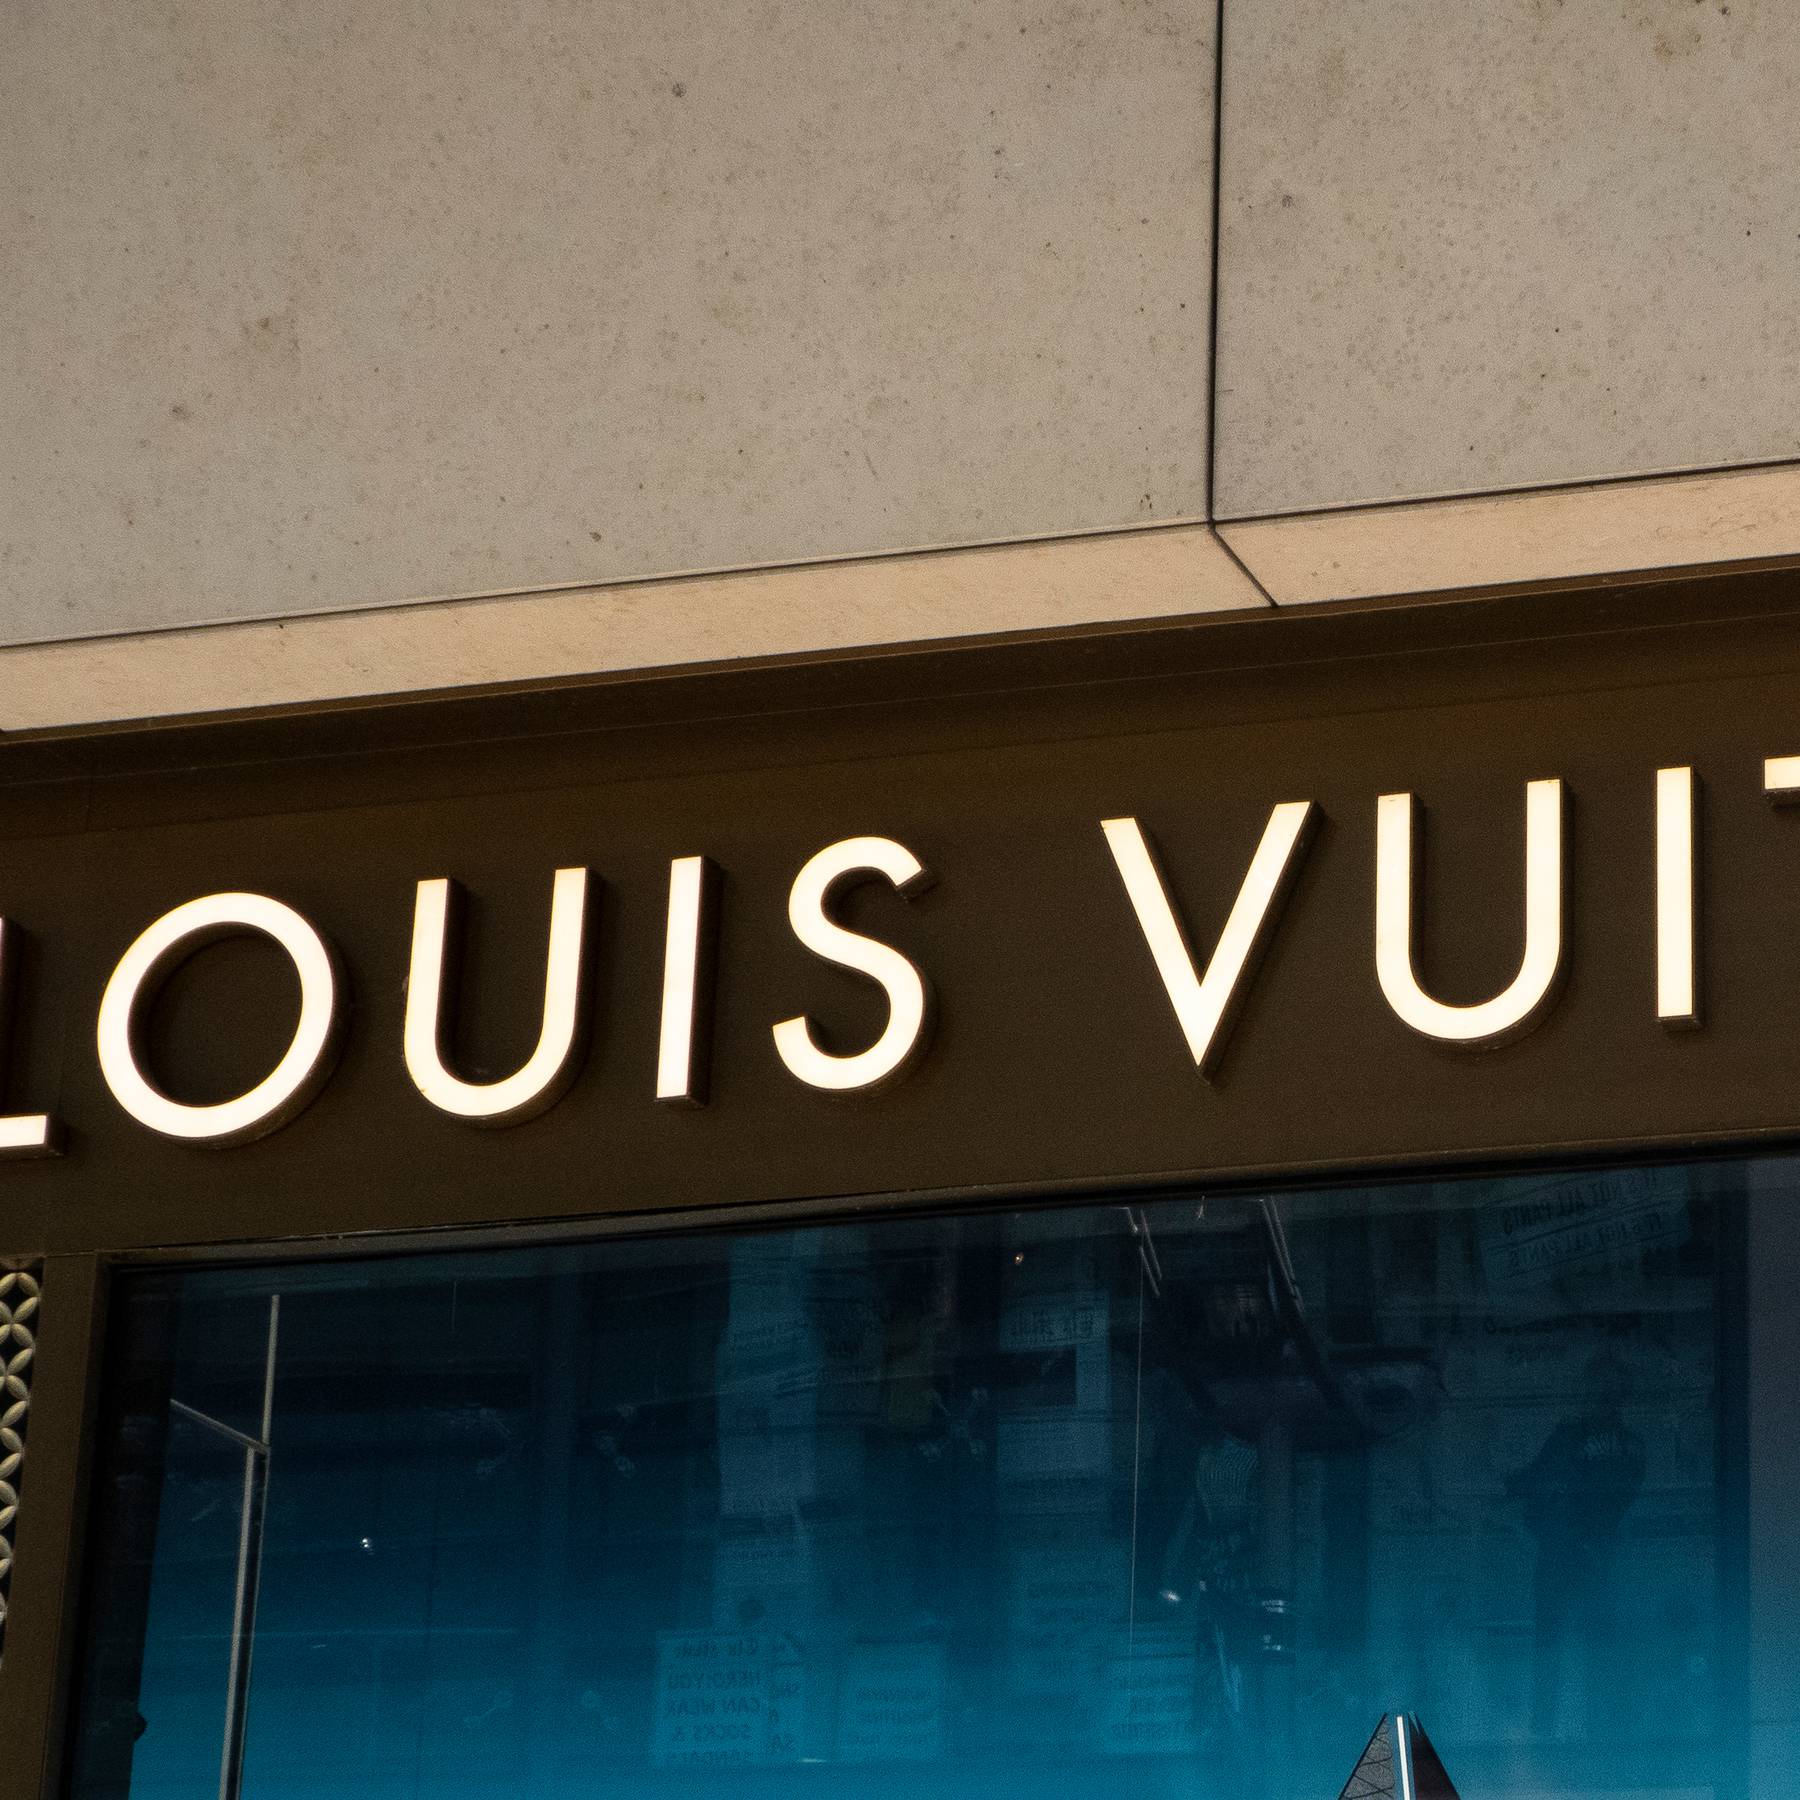 LVMH Moet Hennessy Louis Vuitton SE Stock Gives Every Indication